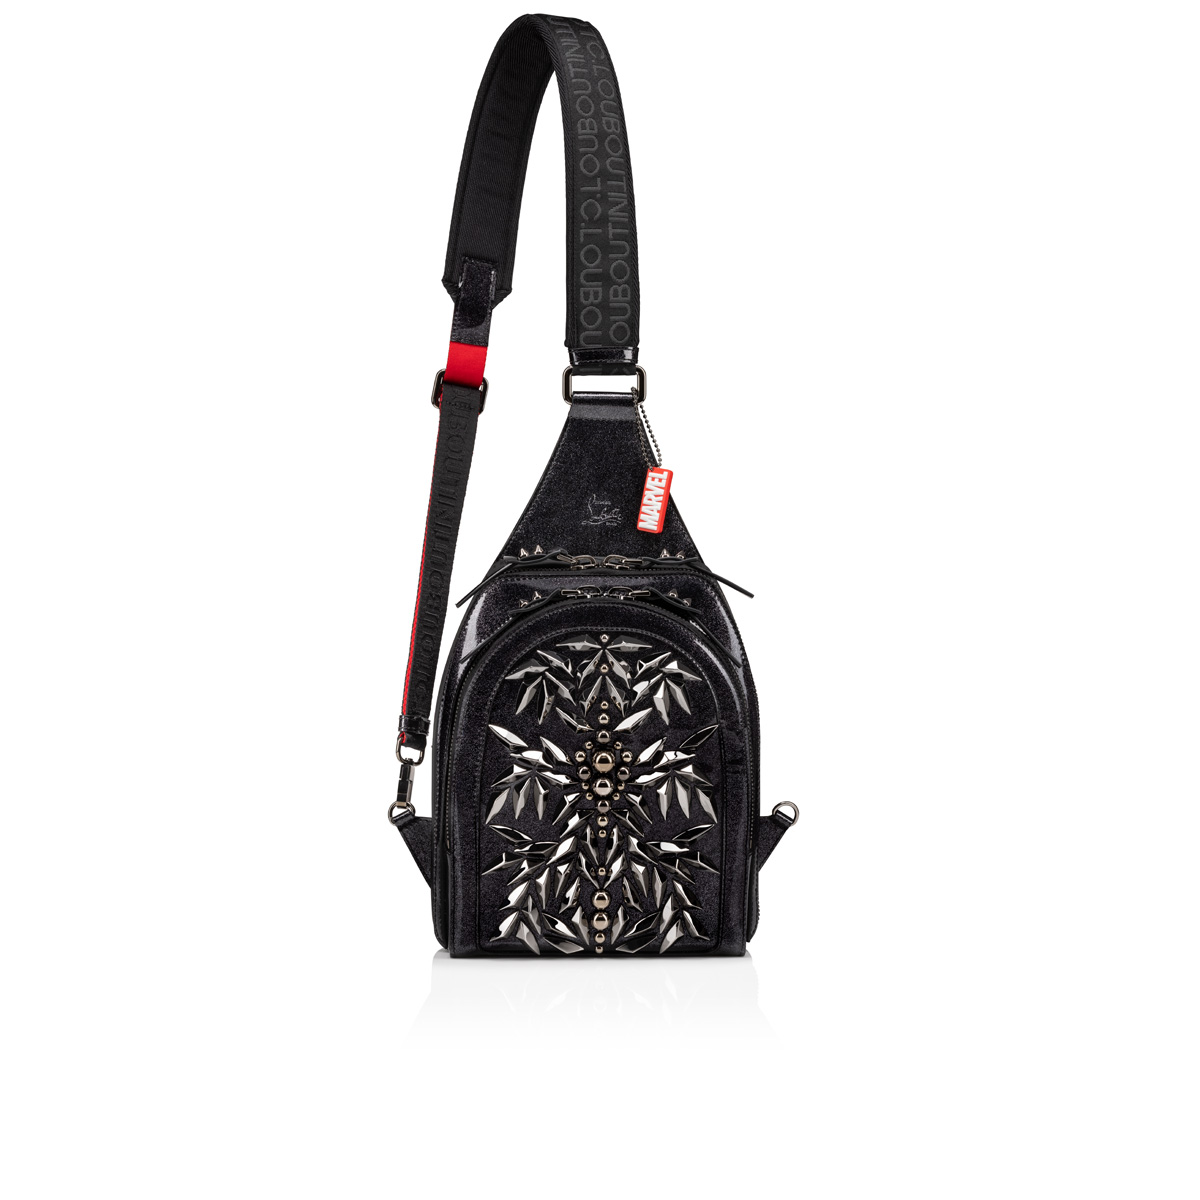 Christian Louboutin Takes On Louis Vuitton with this Collaboration Bag 